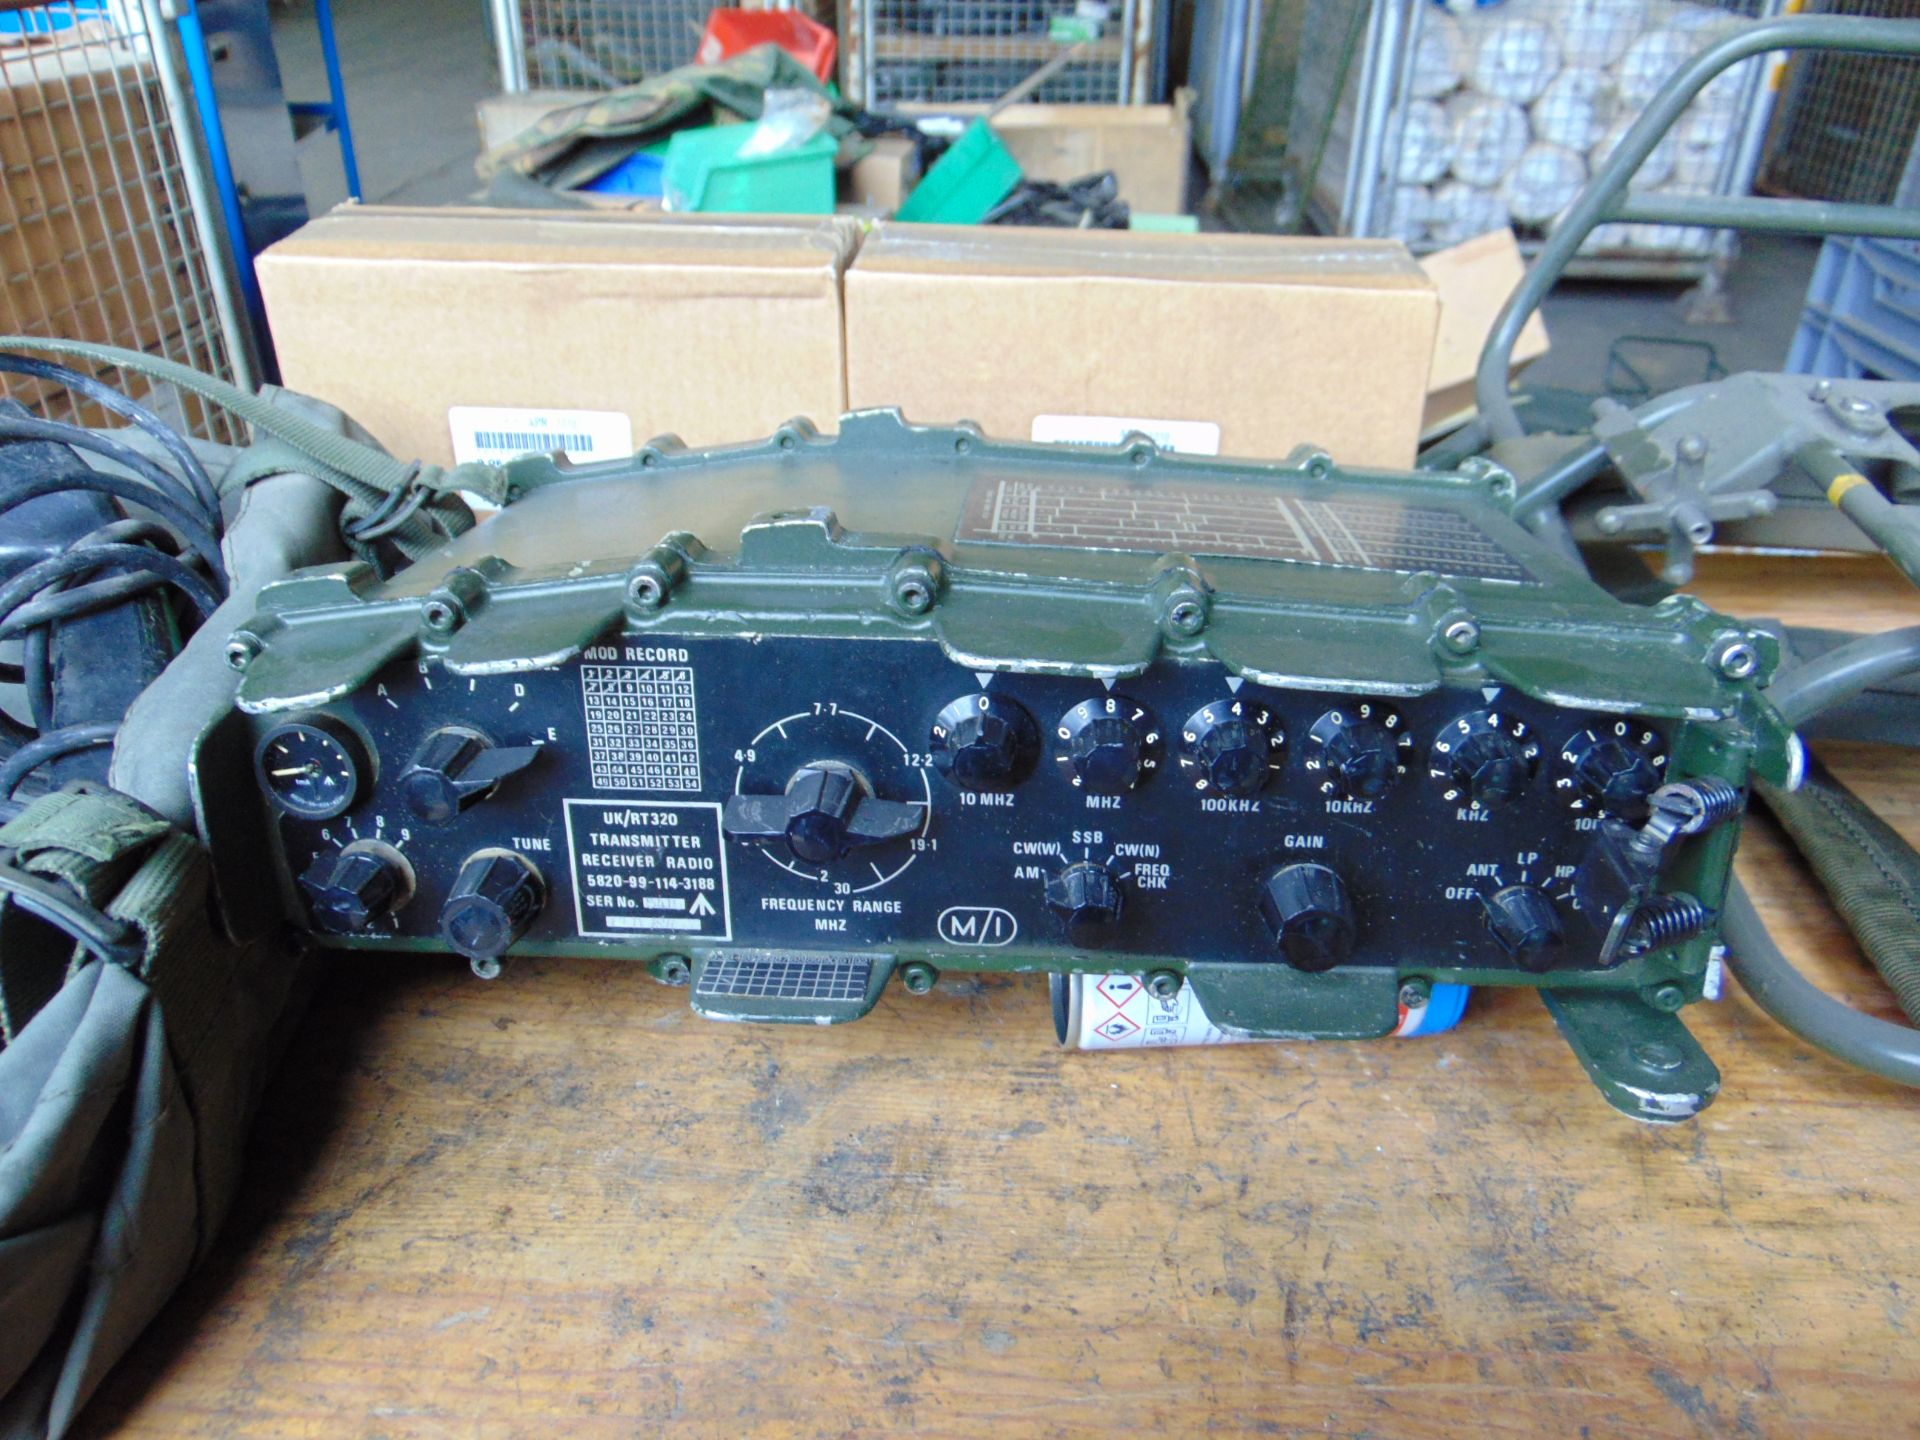 Clansman UK/RT 320 Transmitter Receiver HF c/w Kit & Two Spare Batteries as shown - Image 4 of 5